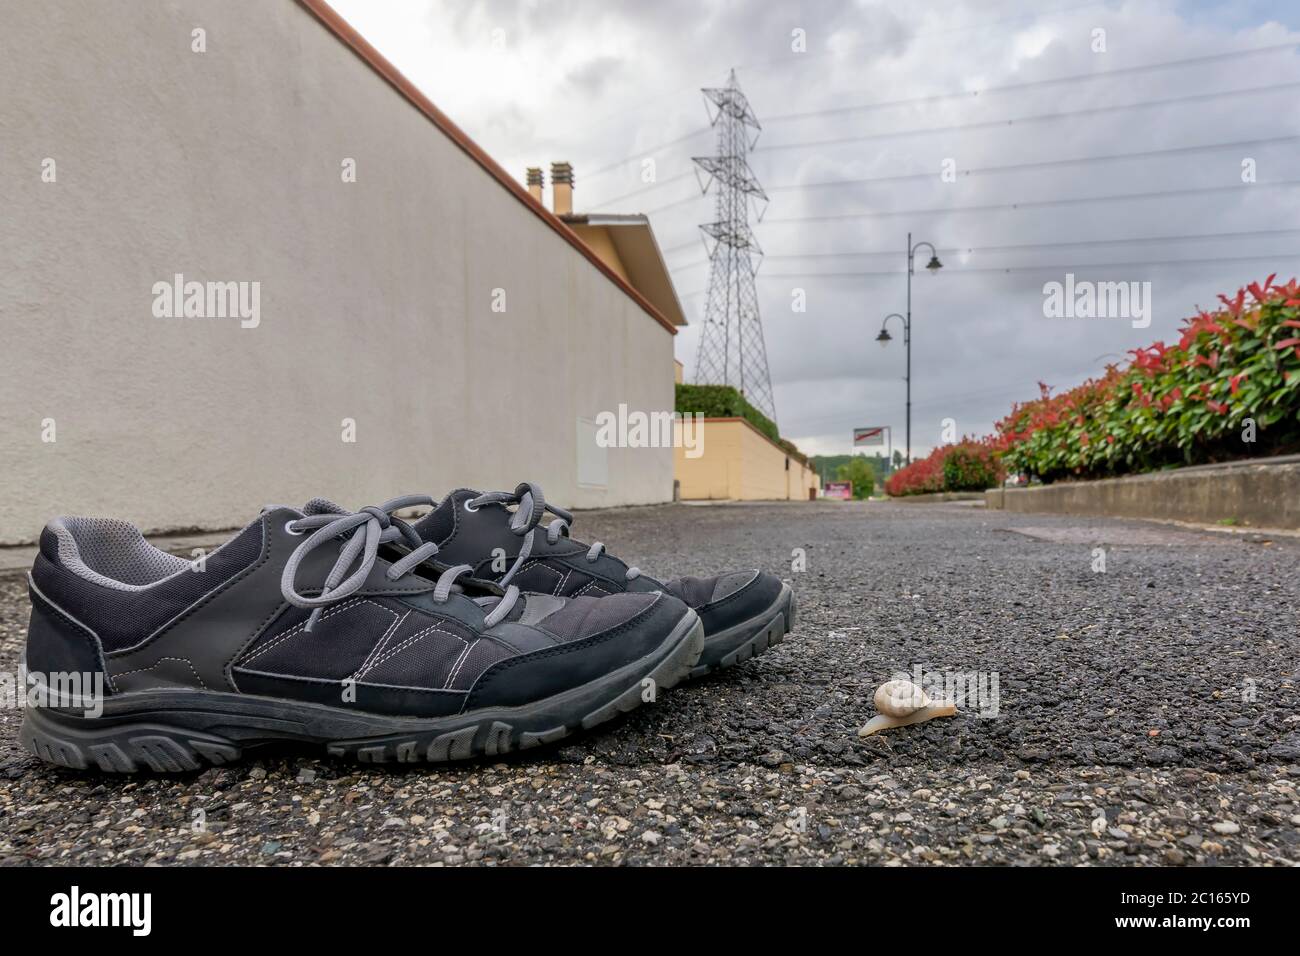 A snail crawls on the asphalt near a pair of sneakers with a high voltage pylon in the background and the cloudy sky Stock Photo